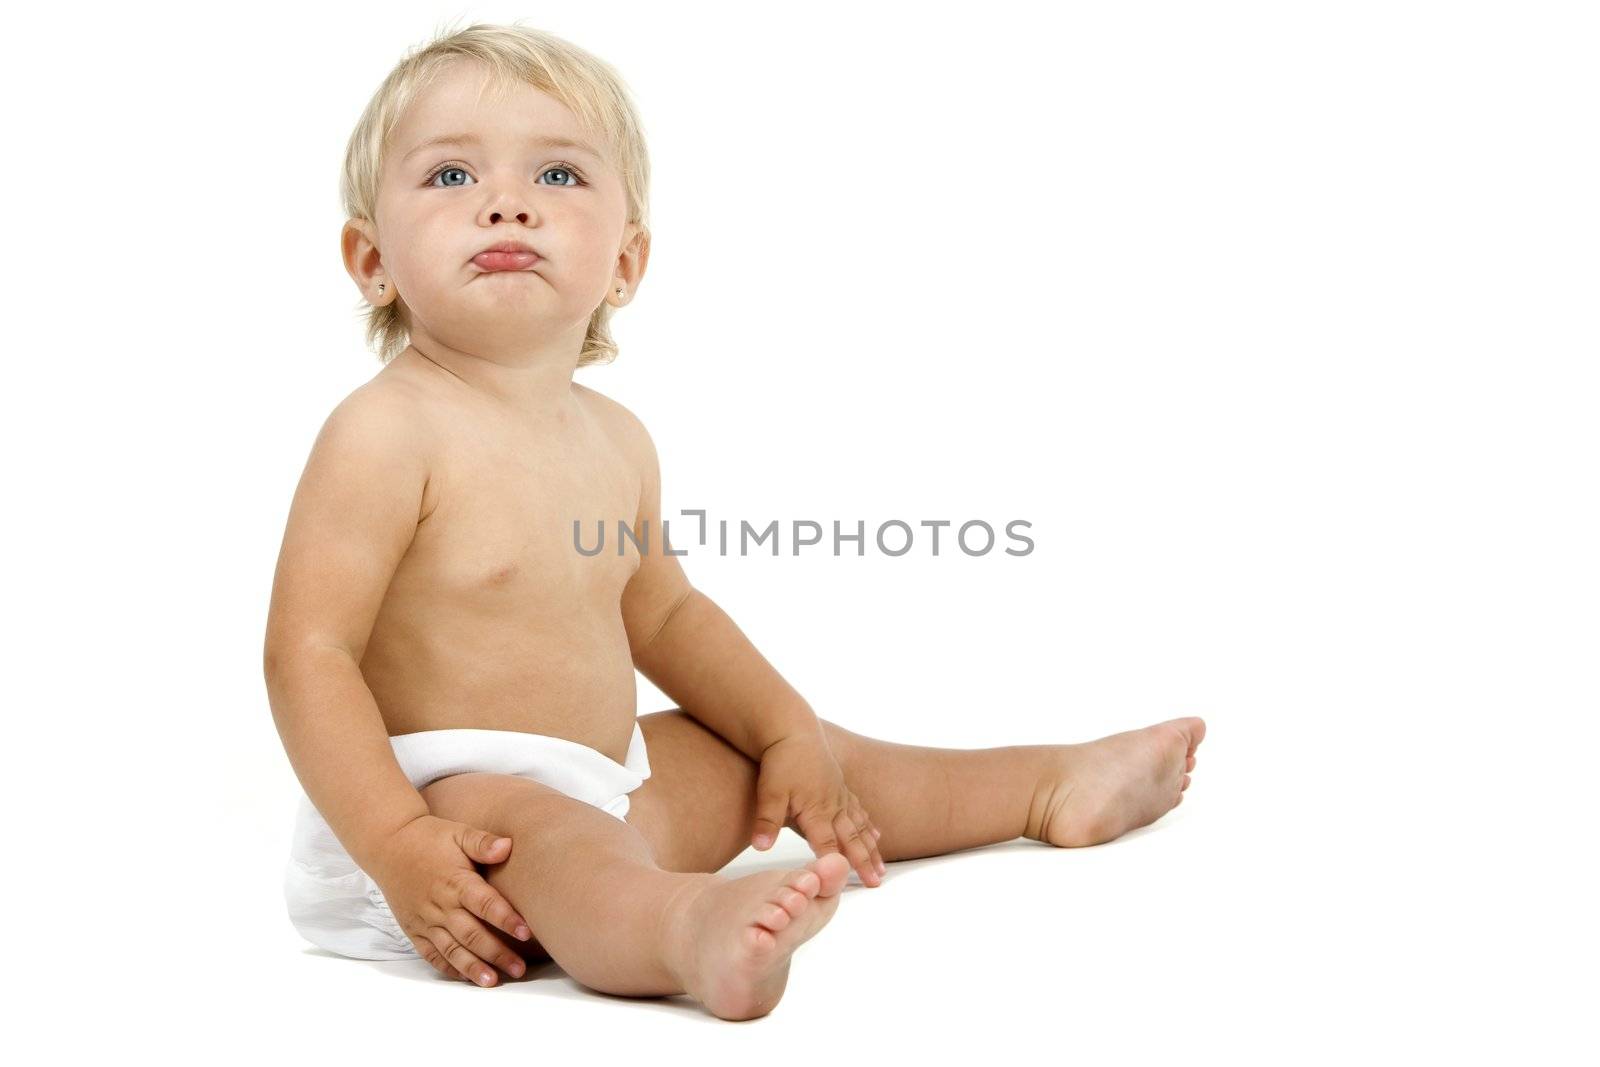 Blue eyed baby girl in huggies with no care face expression. Isolated on white background.